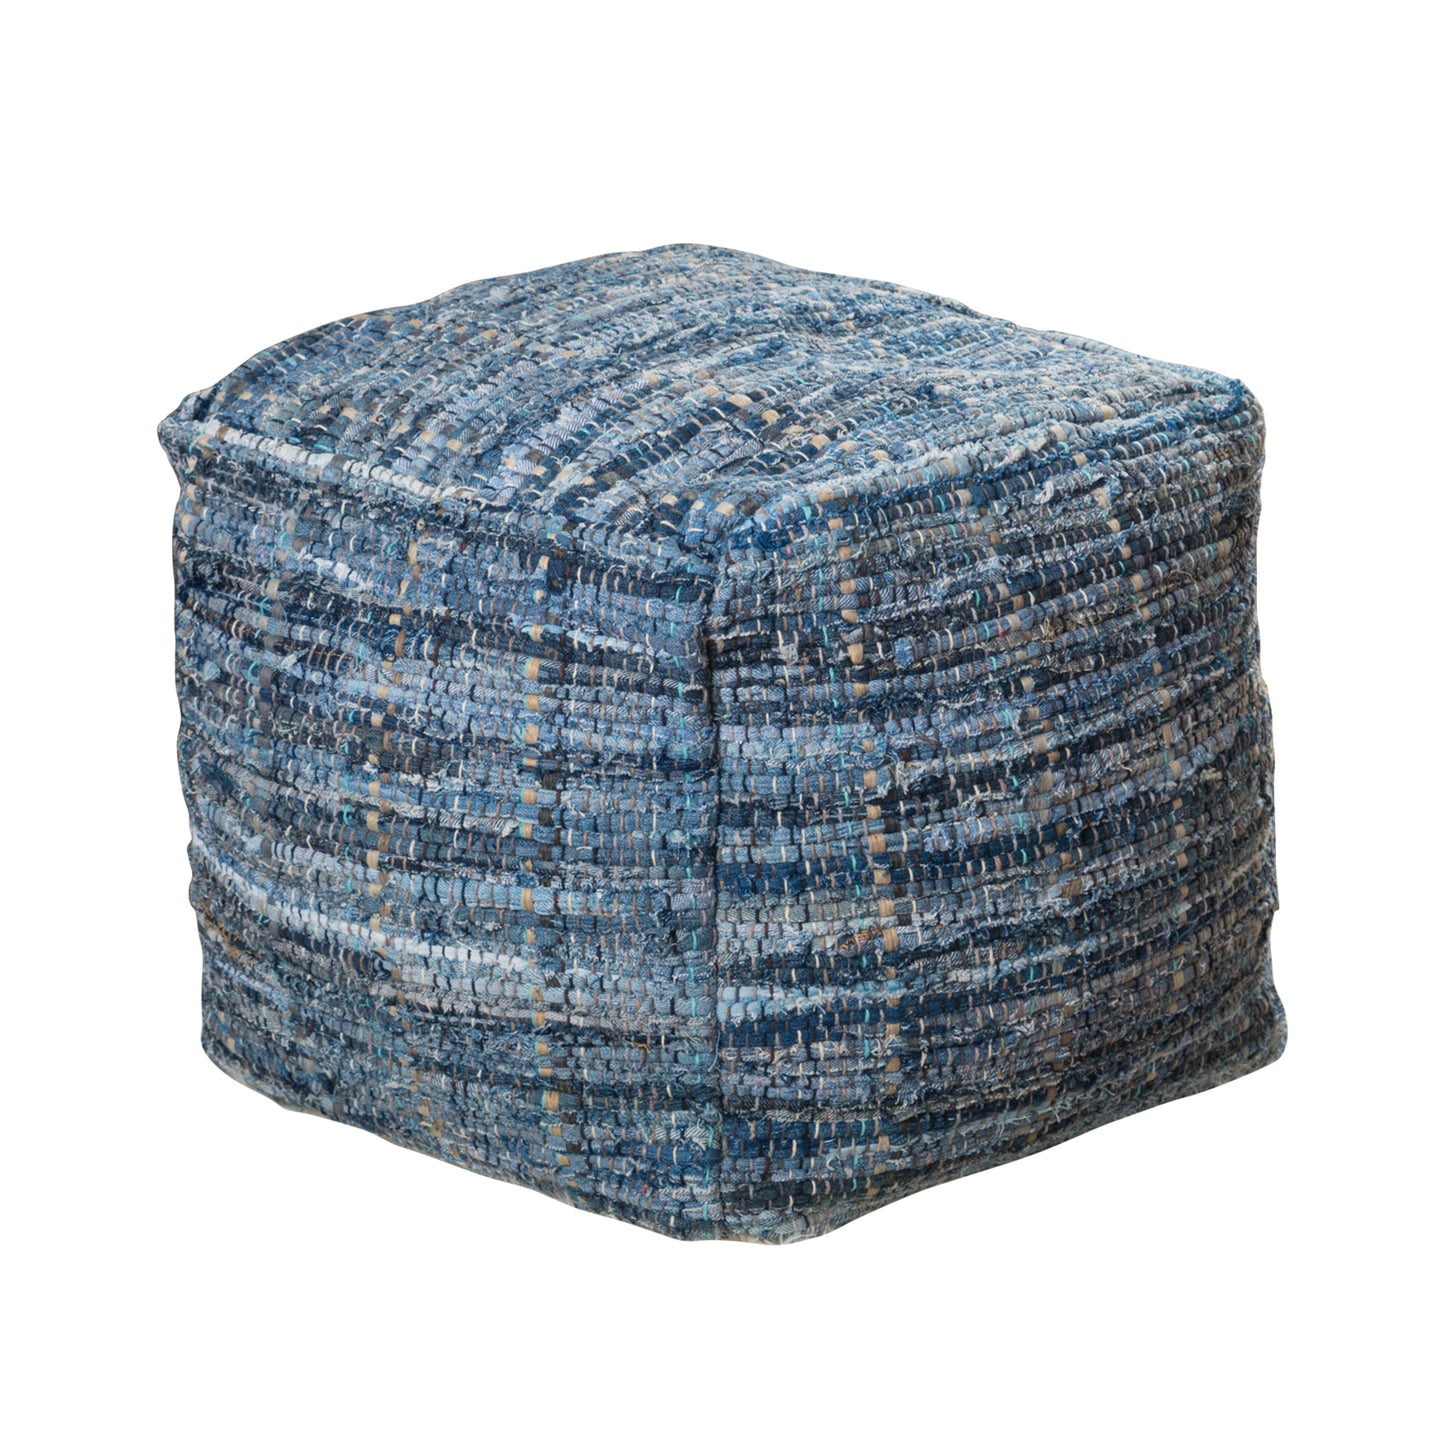 Harlow Handcrafted Boho Fabric Pouf